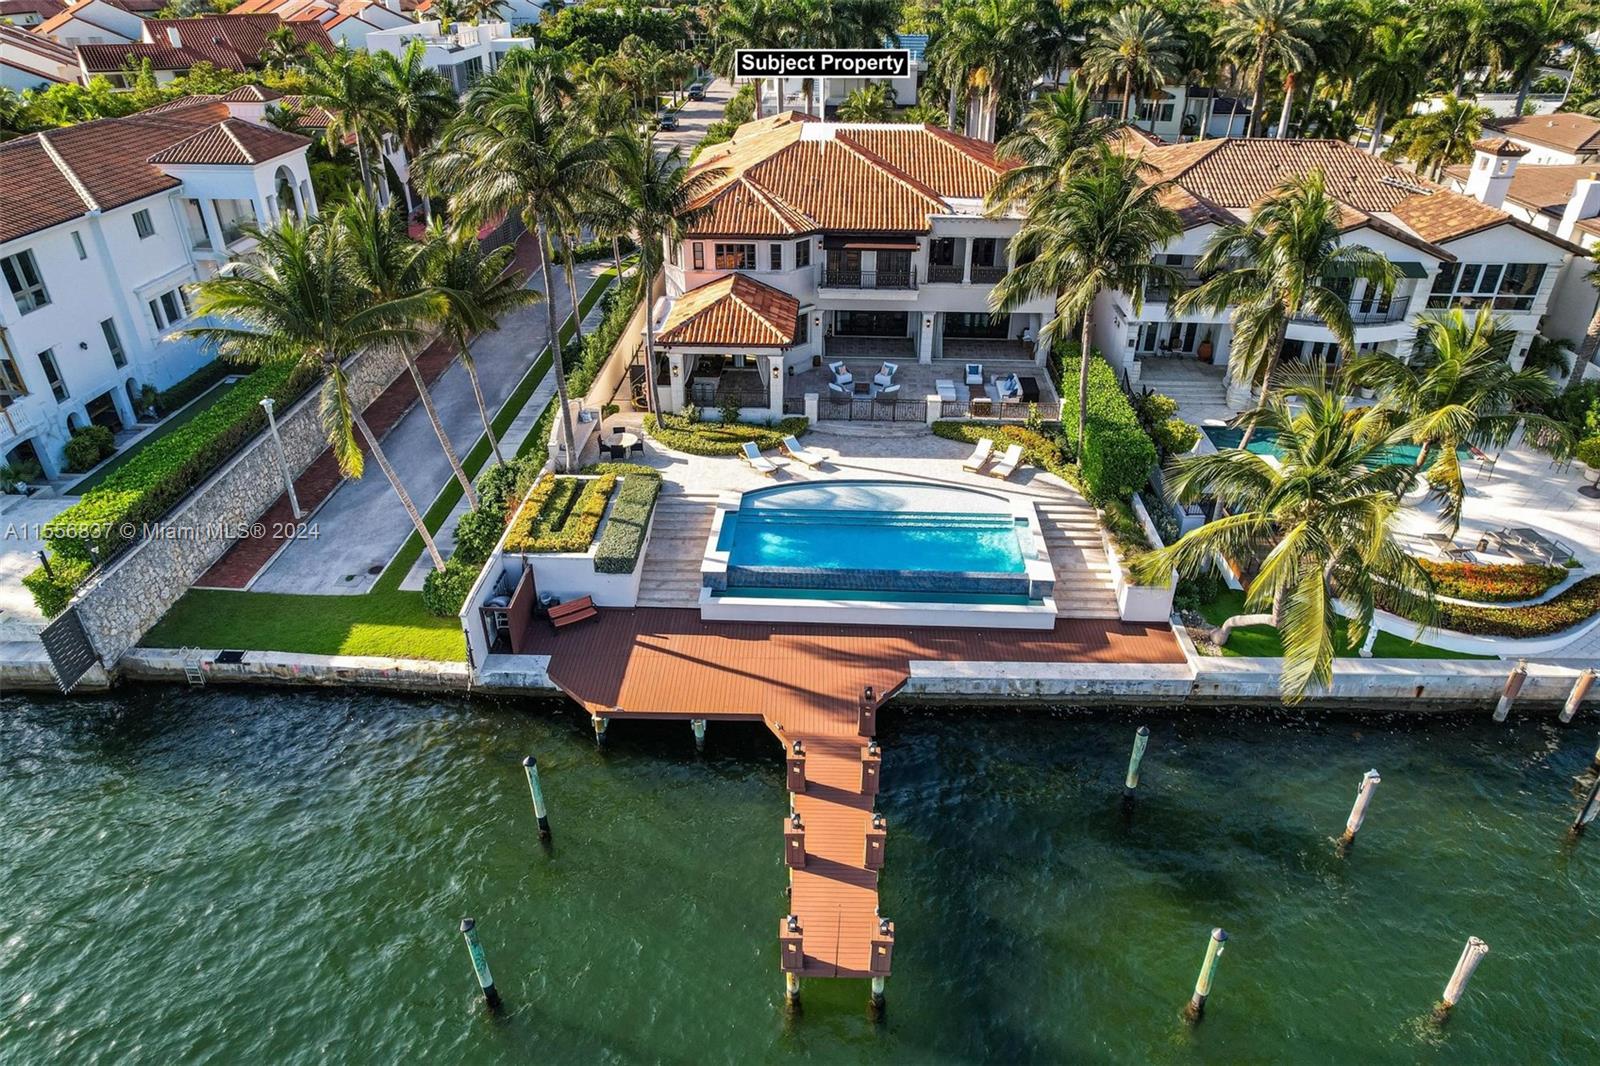 Spectacular Mediterranean home with incredible unobstructed views of Biscayne Bay. This 2-story waterfront residence sits on 2 lots on a quiet street with a gated entrance in Coconut Grove. Features of this 6BR/5+2BA home include a chef's kitchen, two refrigerators & gas range, Viking & Subzero appliances, 2 large wine storage cabinets, custom millwork throughout the home, movie theater, detached 2-bed guest house, & 3-car garage. Outdoor highlights include brand new private dock, infinity pool, covered summer kitchen, and 70 ft of water frontage. Fully gated & walled, with neighborhood security patrol and only one immediate adjacent house, this property feels like a private compound. This is a must see, and will not last. Actual Sq ft: 7,521. By appointment only.